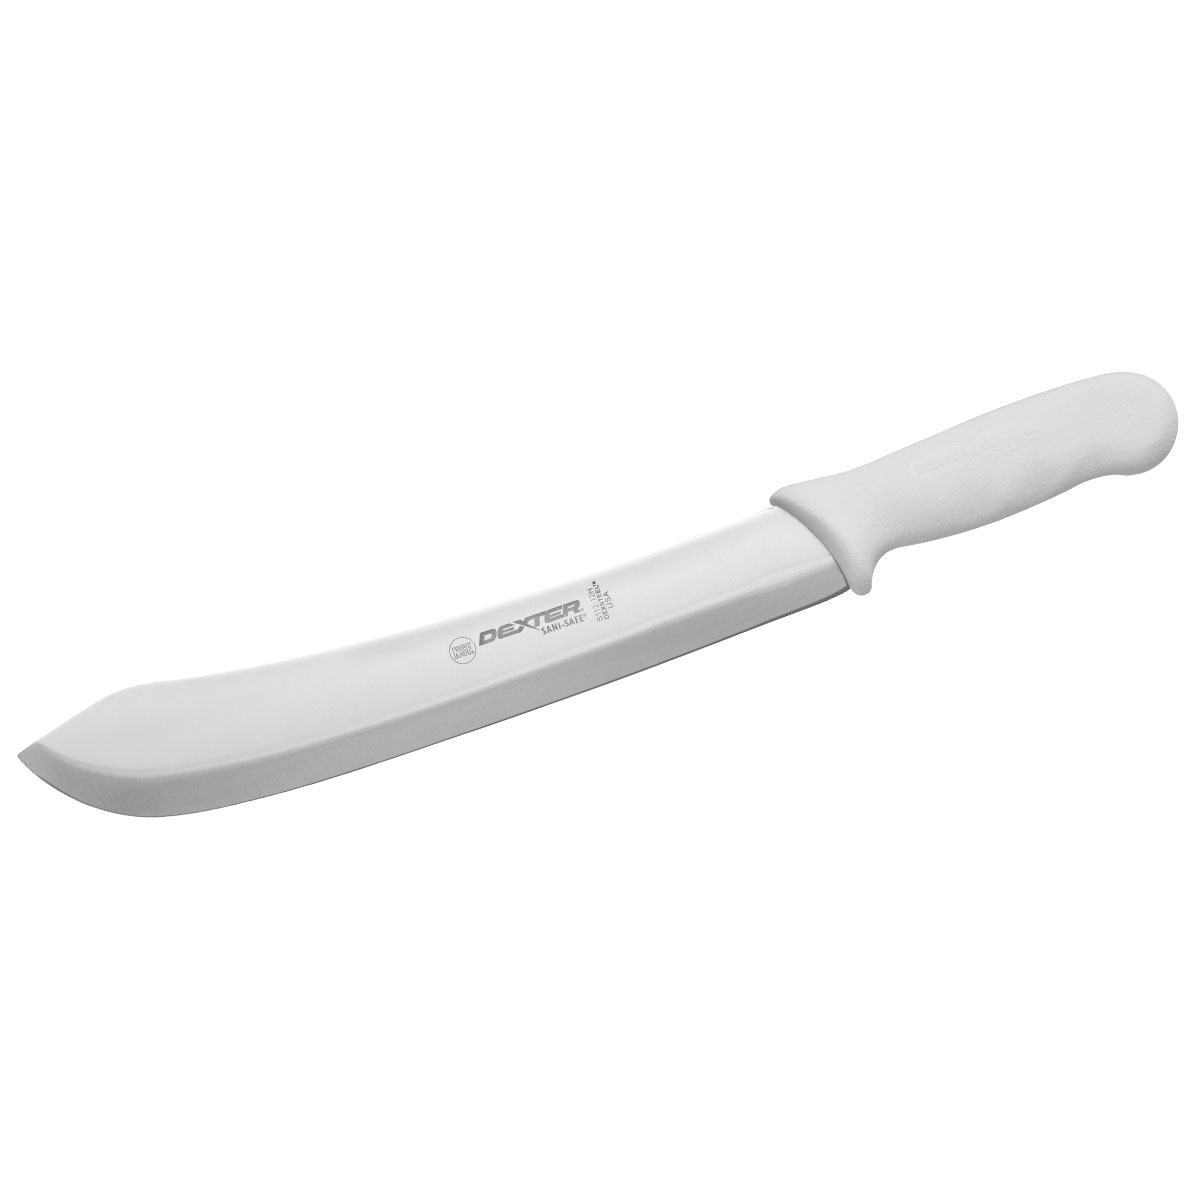 Dexter Russell Sani-Safe Cheese Knife 30cm